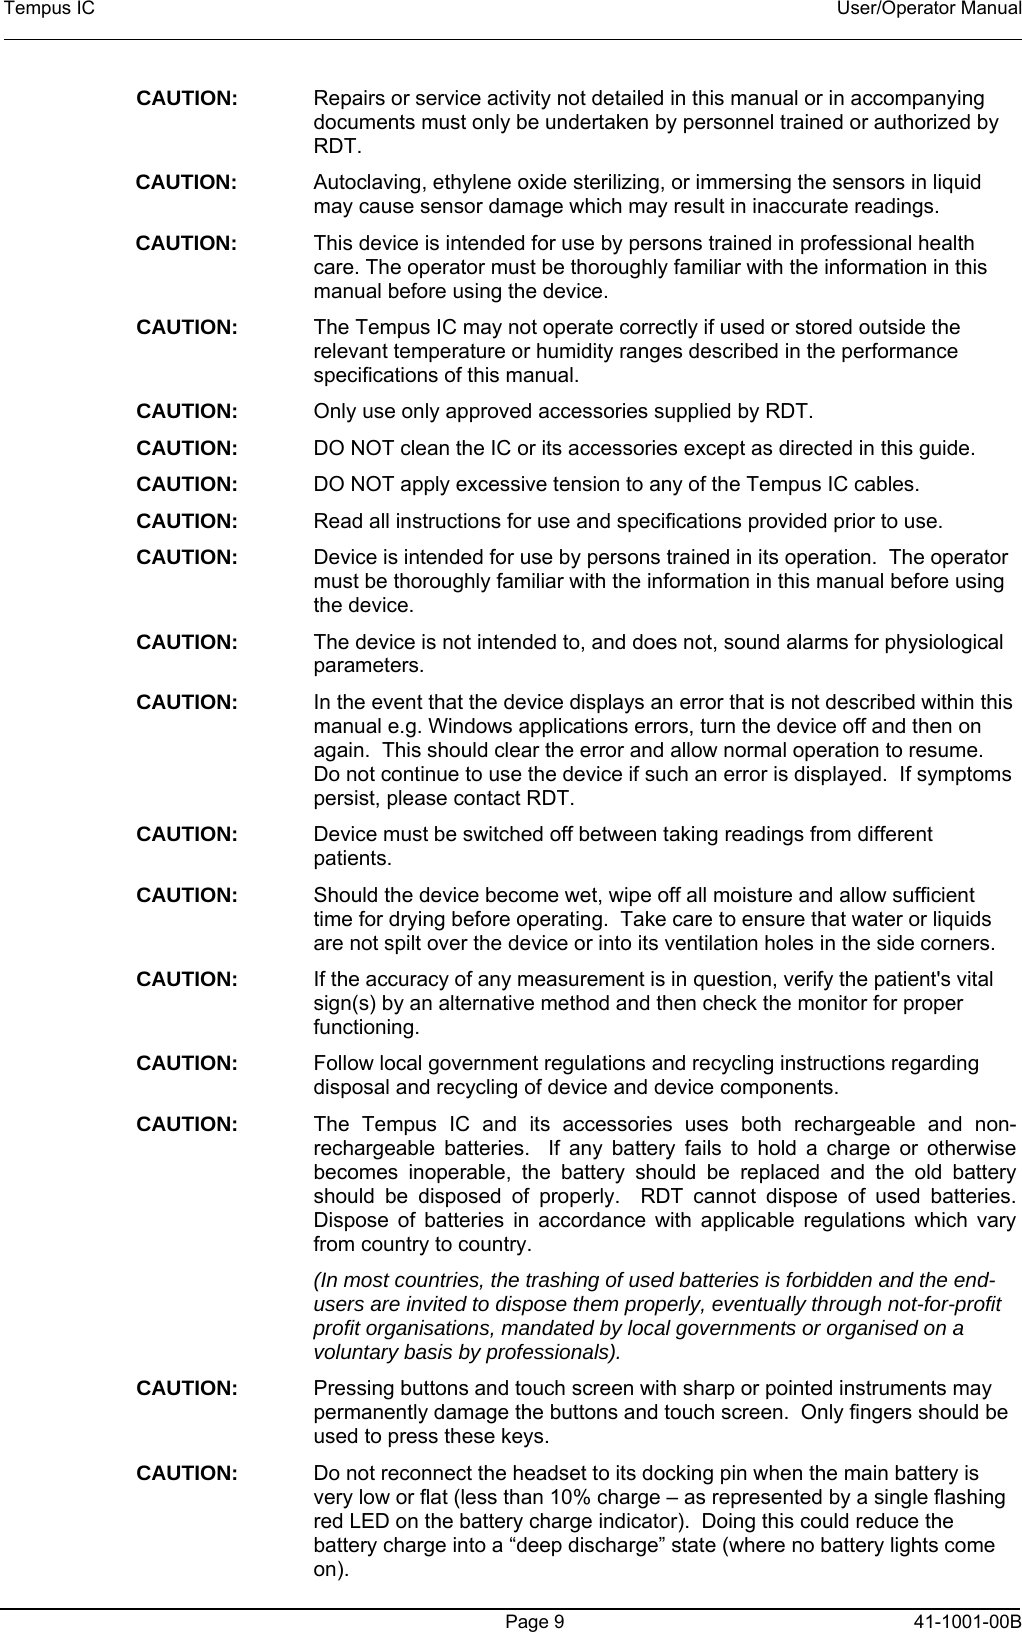 Tempus IC    User/Operator Manual     Page 9  41-1001-00B CAUTION:  Repairs or service activity not detailed in this manual or in accompanying documents must only be undertaken by personnel trained or authorized by RDT. CAUTION:    Autoclaving, ethylene oxide sterilizing, or immersing the sensors in liquid may cause sensor damage which may result in inaccurate readings. CAUTION:    This device is intended for use by persons trained in professional health care. The operator must be thoroughly familiar with the information in this manual before using the device. CAUTION:  The Tempus IC may not operate correctly if used or stored outside the relevant temperature or humidity ranges described in the performance specifications of this manual. CAUTION:  Only use only approved accessories supplied by RDT. CAUTION:  DO NOT clean the IC or its accessories except as directed in this guide. CAUTION:  DO NOT apply excessive tension to any of the Tempus IC cables. CAUTION:  Read all instructions for use and specifications provided prior to use.  CAUTION:  Device is intended for use by persons trained in its operation.  The operator must be thoroughly familiar with the information in this manual before using the device. CAUTION:  The device is not intended to, and does not, sound alarms for physiological parameters.   CAUTION:  In the event that the device displays an error that is not described within this manual e.g. Windows applications errors, turn the device off and then on again.  This should clear the error and allow normal operation to resume.  Do not continue to use the device if such an error is displayed.  If symptoms persist, please contact RDT. CAUTION:  Device must be switched off between taking readings from different patients. CAUTION:  Should the device become wet, wipe off all moisture and allow sufficient time for drying before operating.  Take care to ensure that water or liquids are not spilt over the device or into its ventilation holes in the side corners. CAUTION:  If the accuracy of any measurement is in question, verify the patient&apos;s vital sign(s) by an alternative method and then check the monitor for proper functioning. CAUTION:  Follow local government regulations and recycling instructions regarding disposal and recycling of device and device components. CAUTION:  The Tempus IC and its accessories uses both rechargeable and non-rechargeable batteries.  If any battery fails to hold a charge or otherwise becomes inoperable, the battery should be replaced and the old battery should be disposed of properly.  RDT cannot dispose of used batteries. Dispose of batteries in accordance with applicable regulations which vary from country to country.   (In most countries, the trashing of used batteries is forbidden and the end-users are invited to dispose them properly, eventually through not-for-profit profit organisations, mandated by local governments or organised on a voluntary basis by professionals). CAUTION:  Pressing buttons and touch screen with sharp or pointed instruments may permanently damage the buttons and touch screen.  Only fingers should be used to press these keys. CAUTION:  Do not reconnect the headset to its docking pin when the main battery is very low or flat (less than 10% charge – as represented by a single flashing red LED on the battery charge indicator).  Doing this could reduce the battery charge into a “deep discharge” state (where no battery lights come on). 